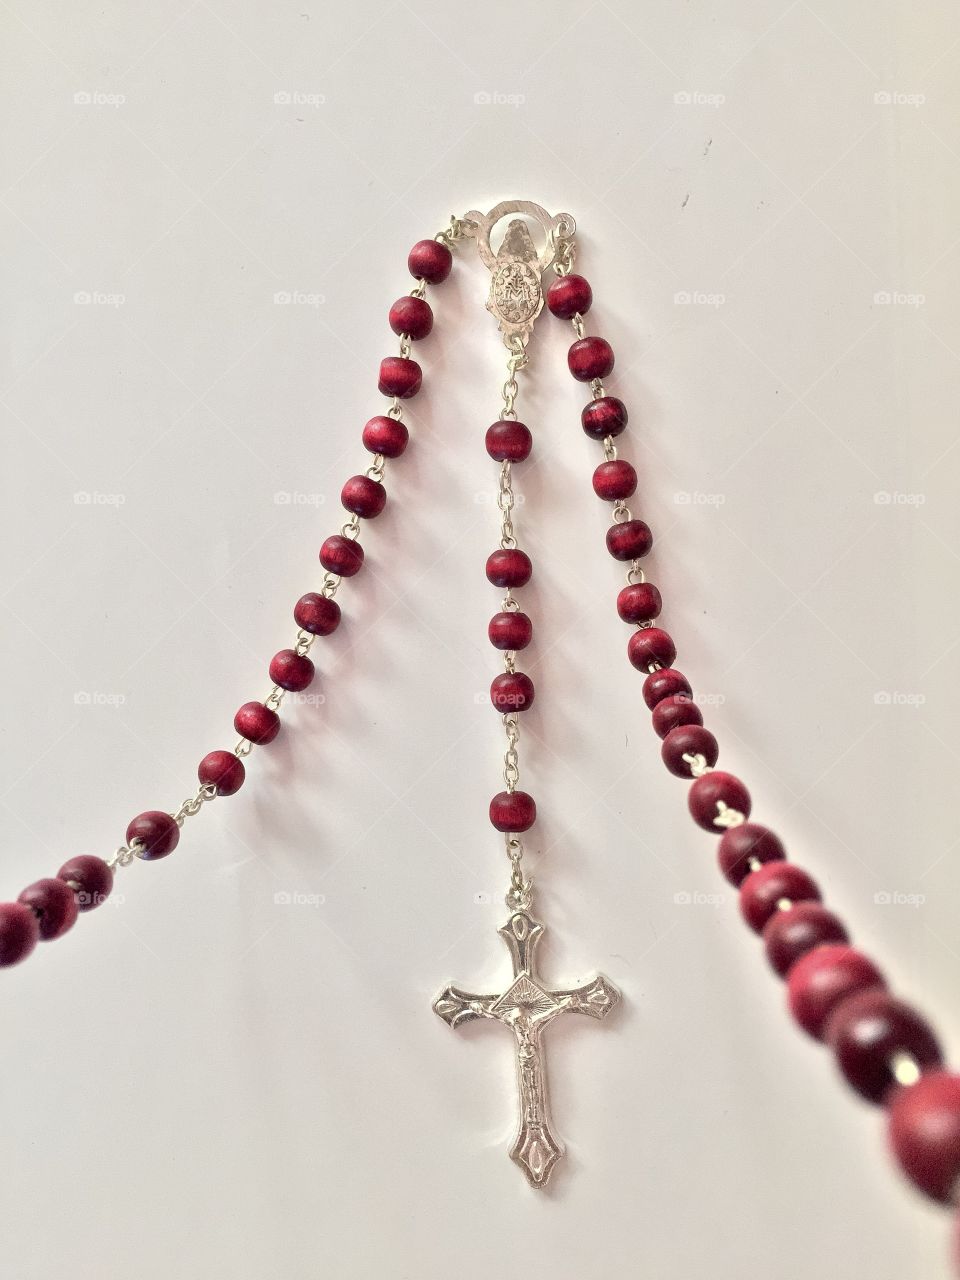 Red bead rosary against a white background 